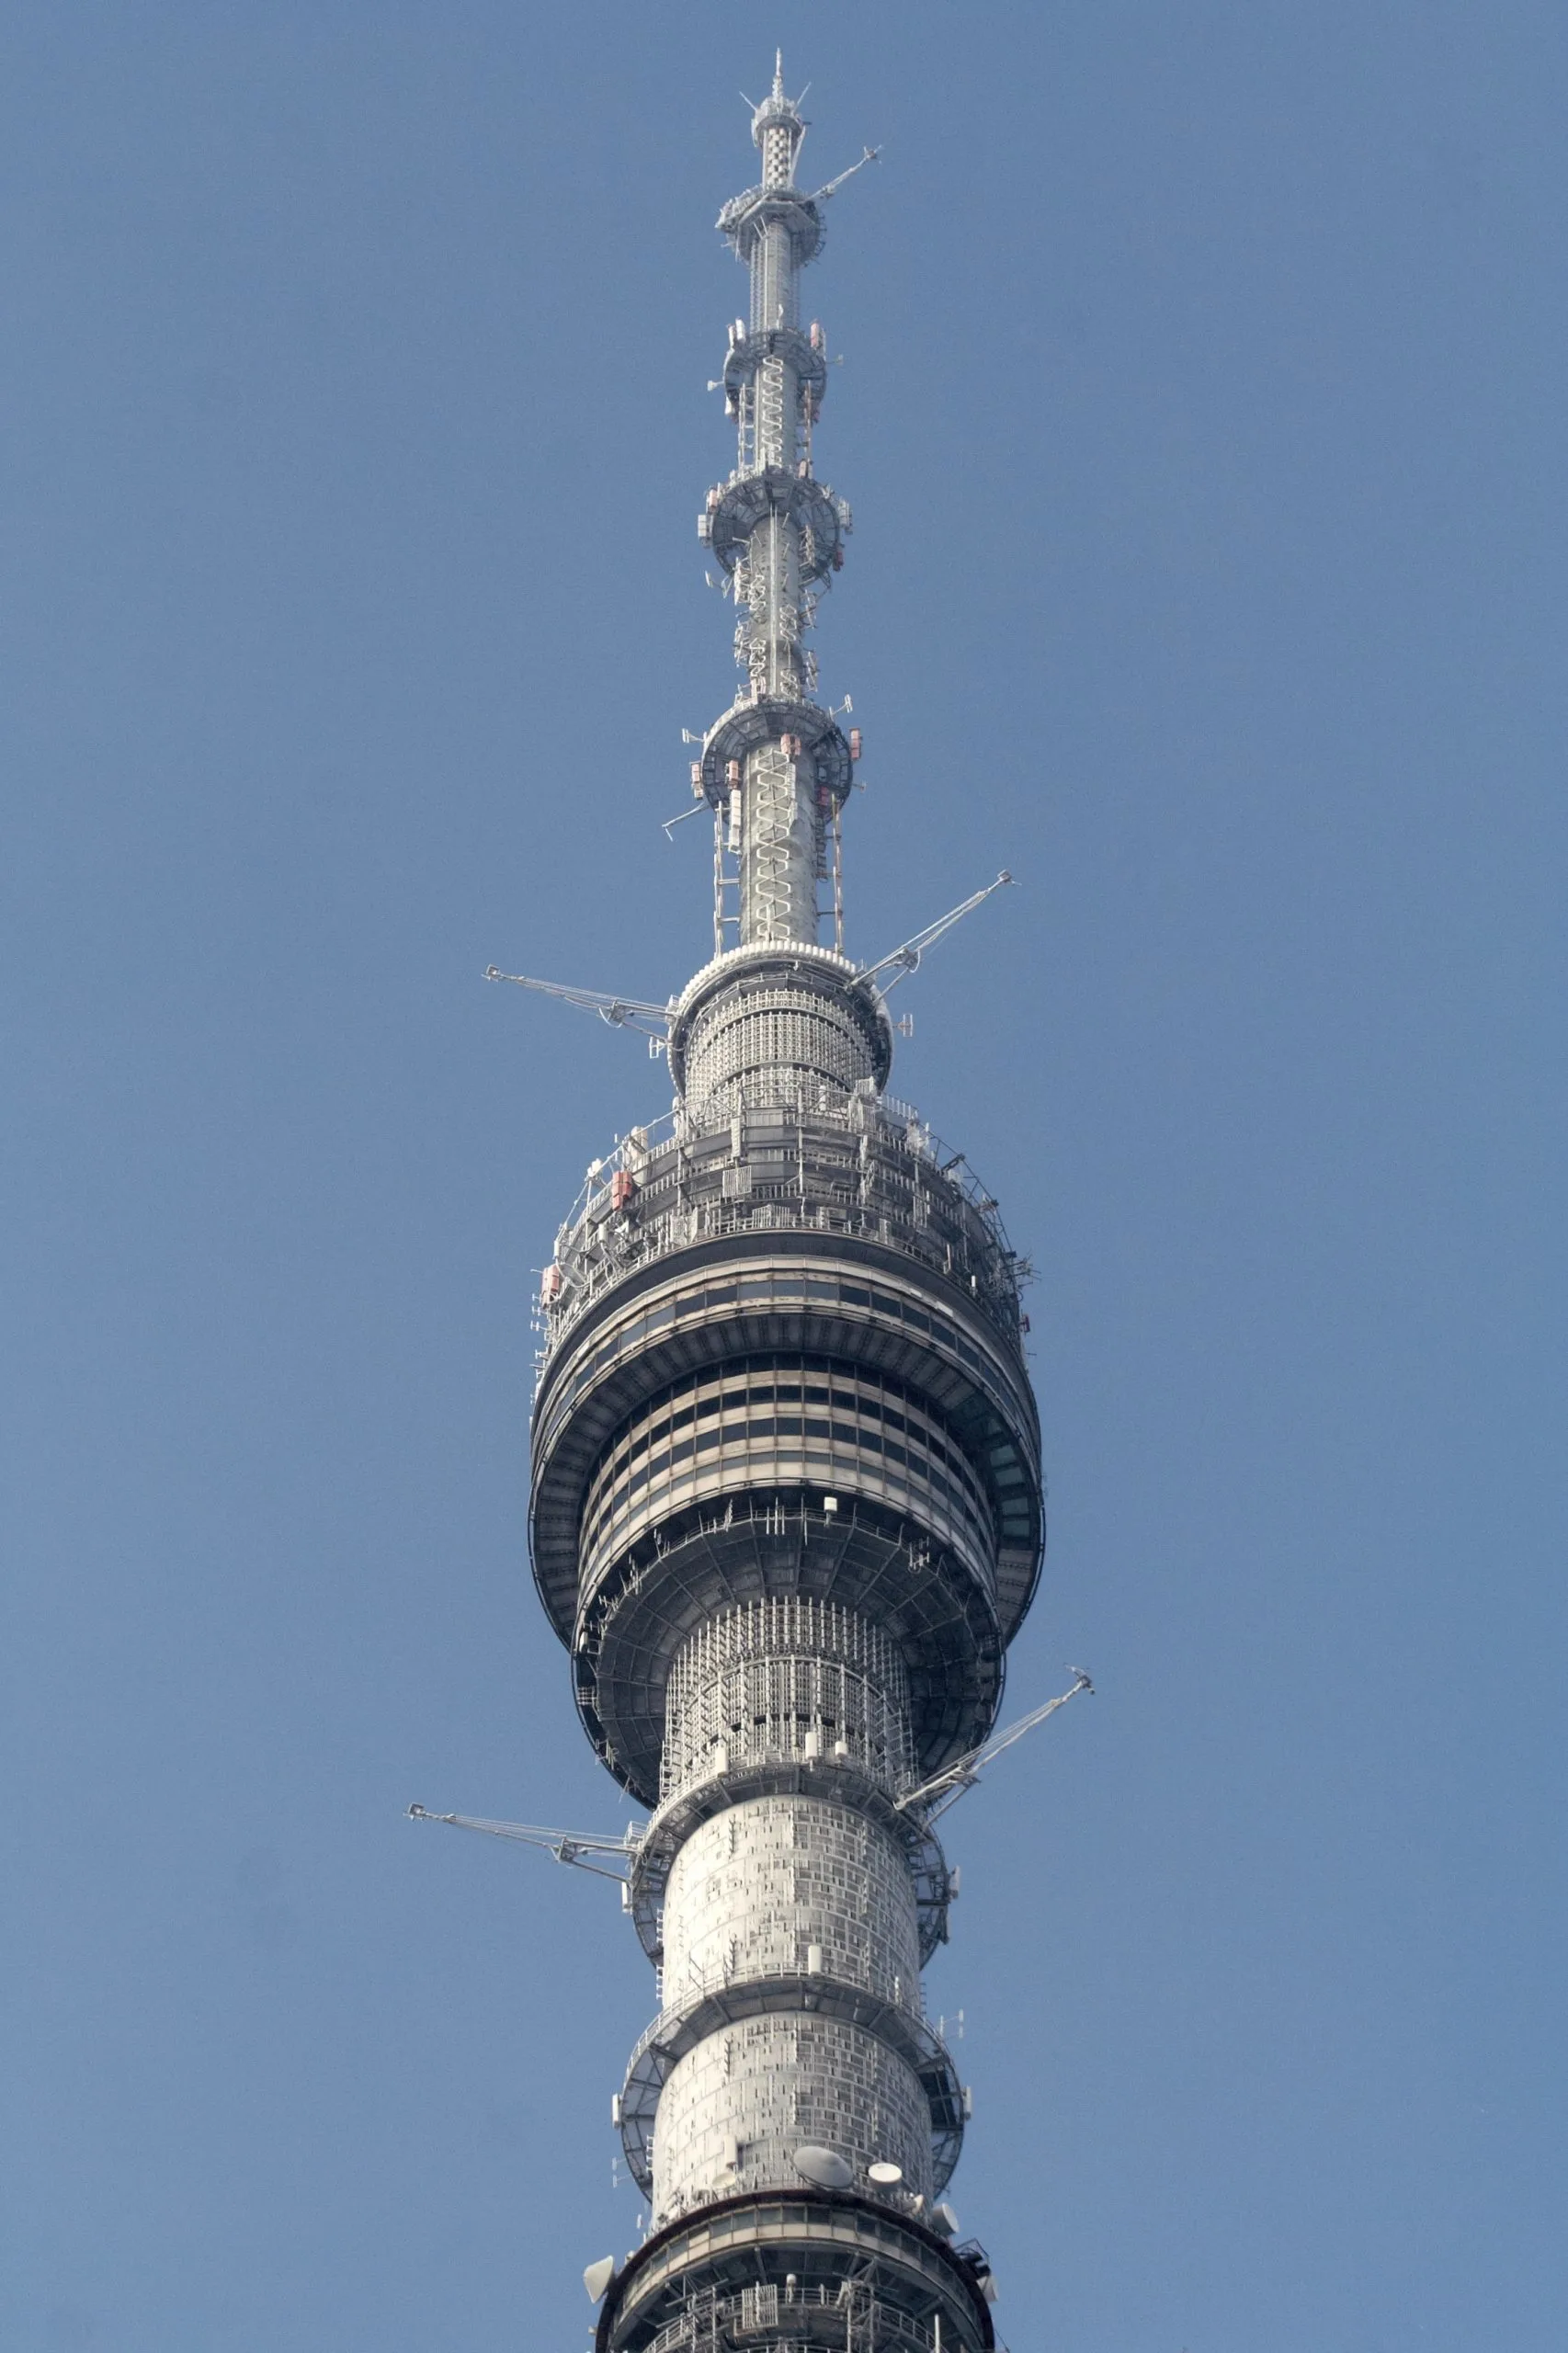 Top of the Ostankino Tower